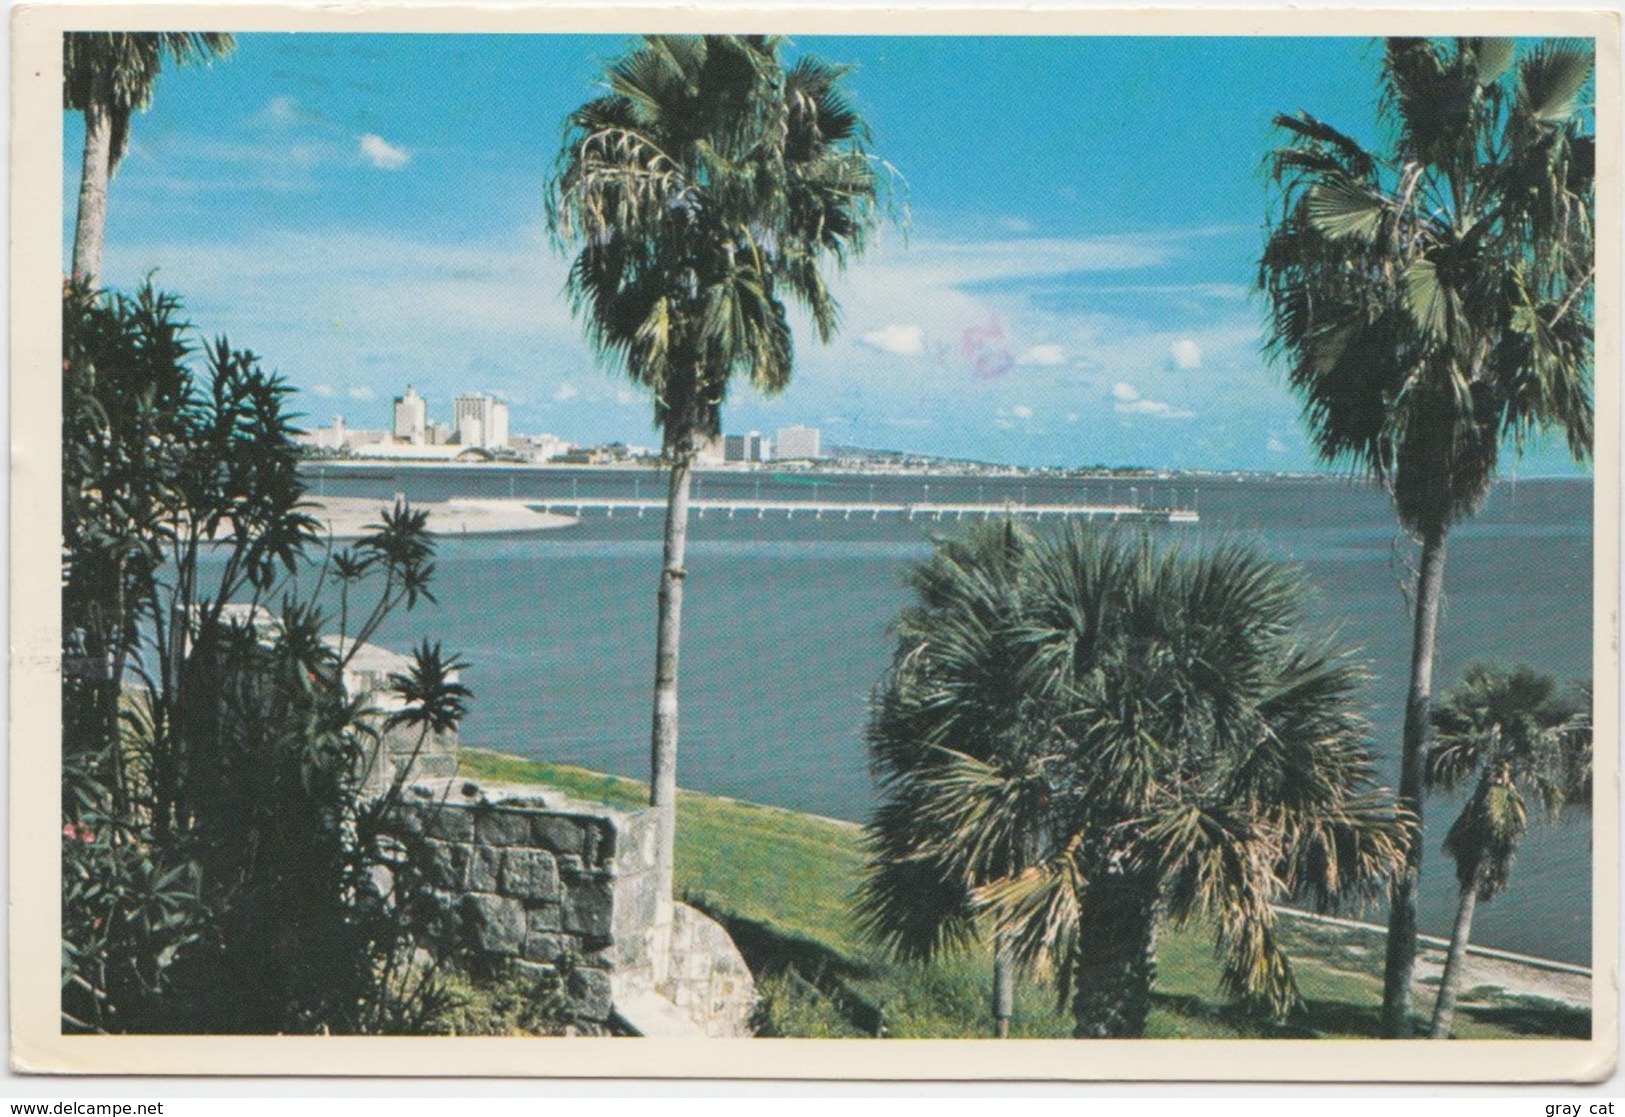 A View Of Corpus Christi, Texas, View From Ocean Drive, Used Postcard [20805] - Corpus Christi